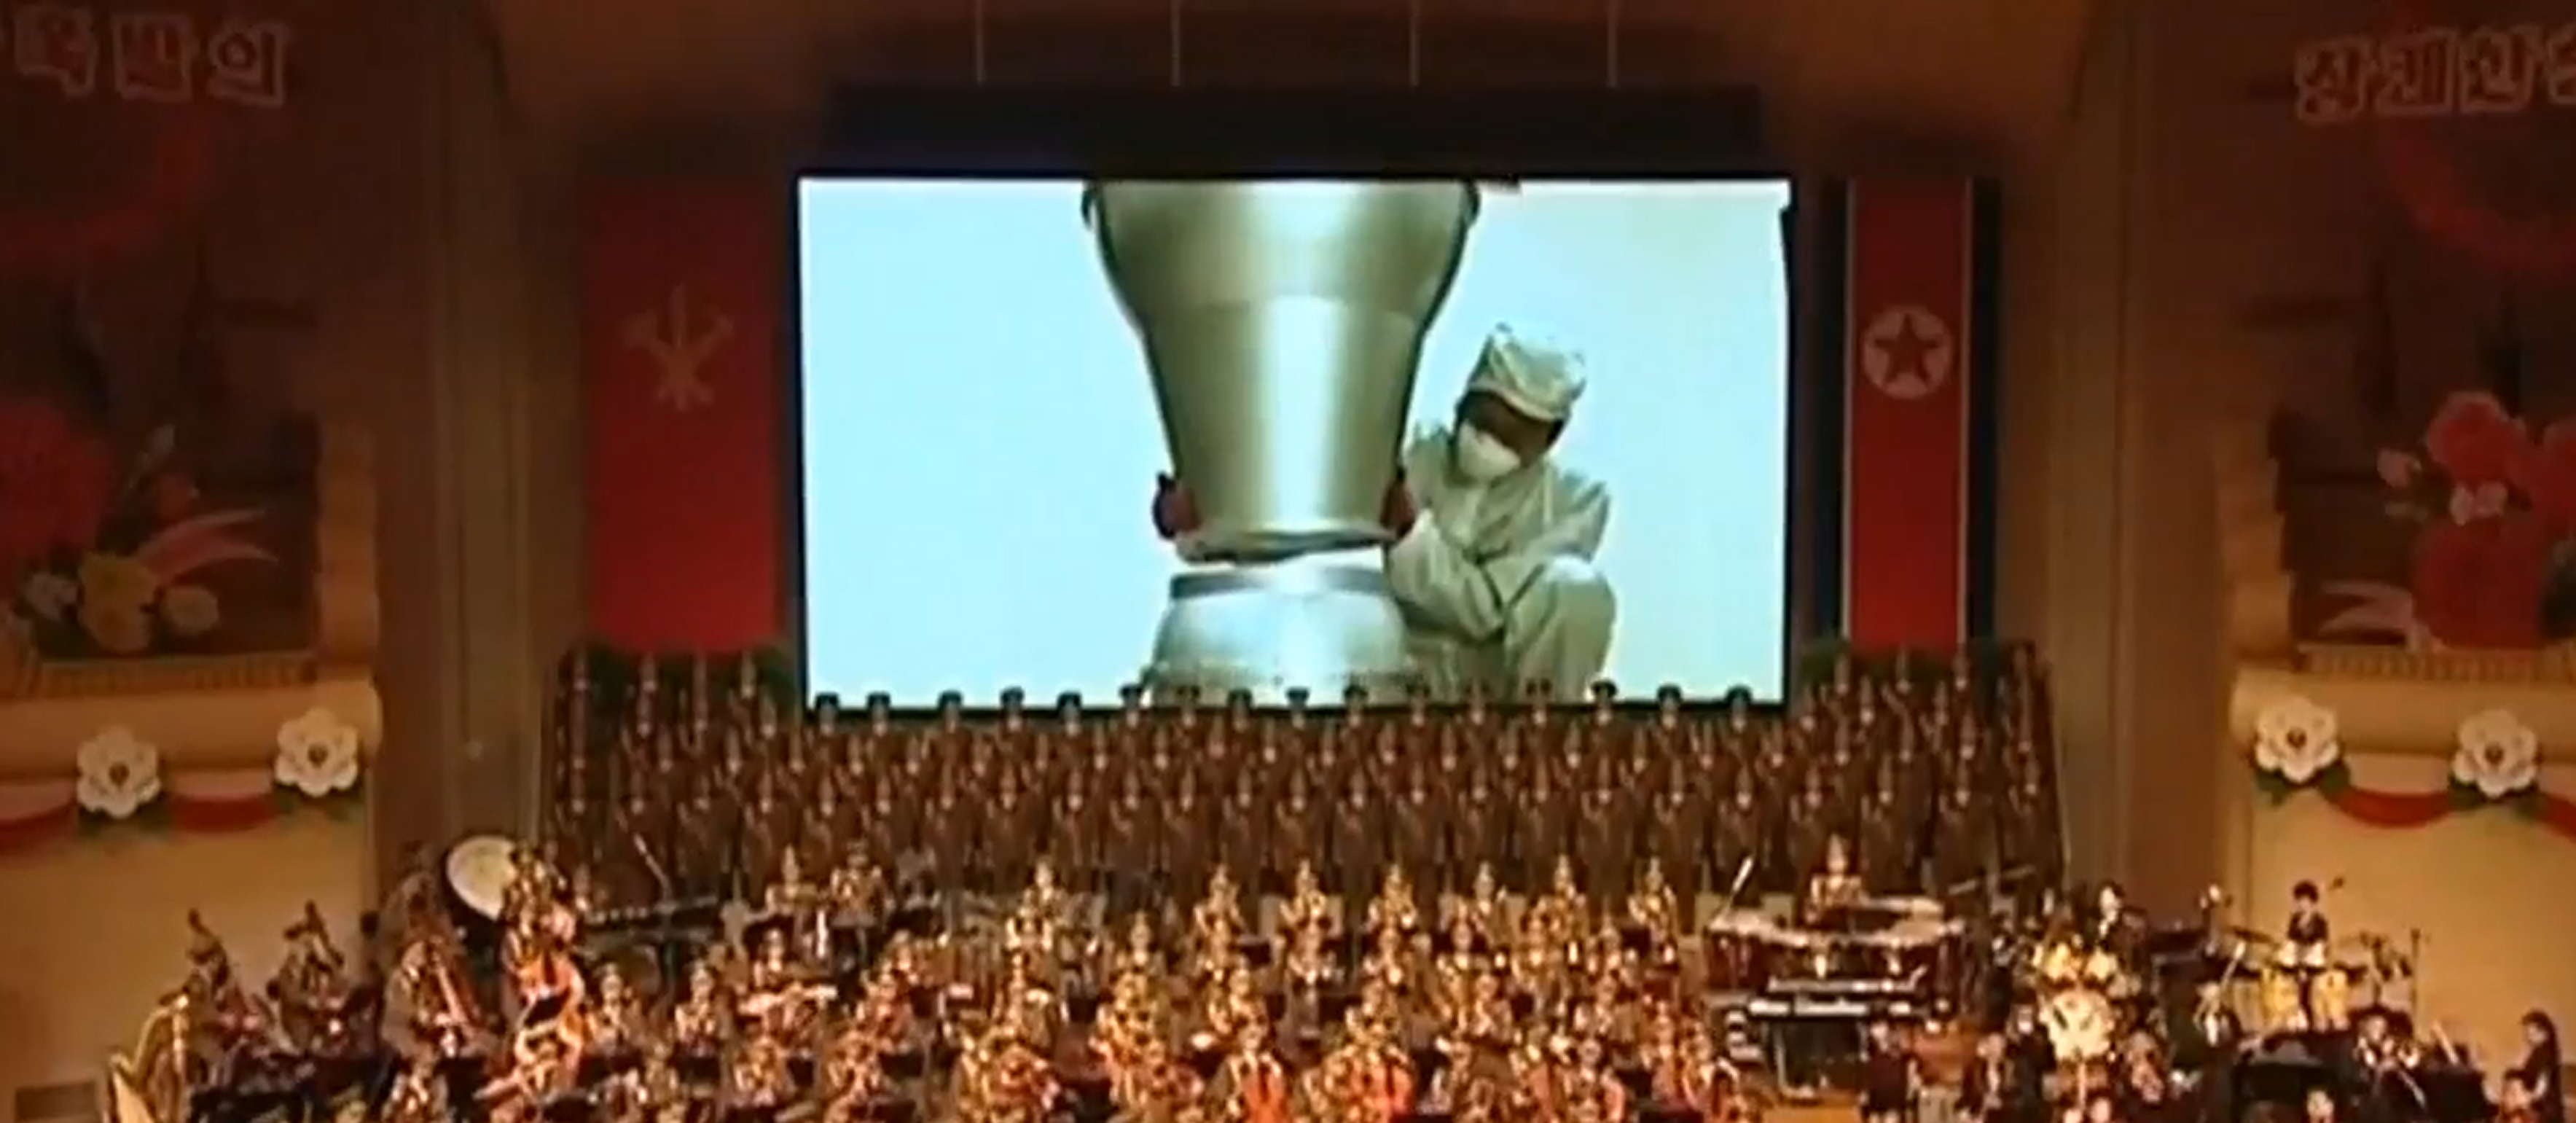 Figure 13. Concert celebrating sixth nuclear test displaying short clip of assembly of purported two-stage thermonuclear device. Image: KCTV/Arirang News